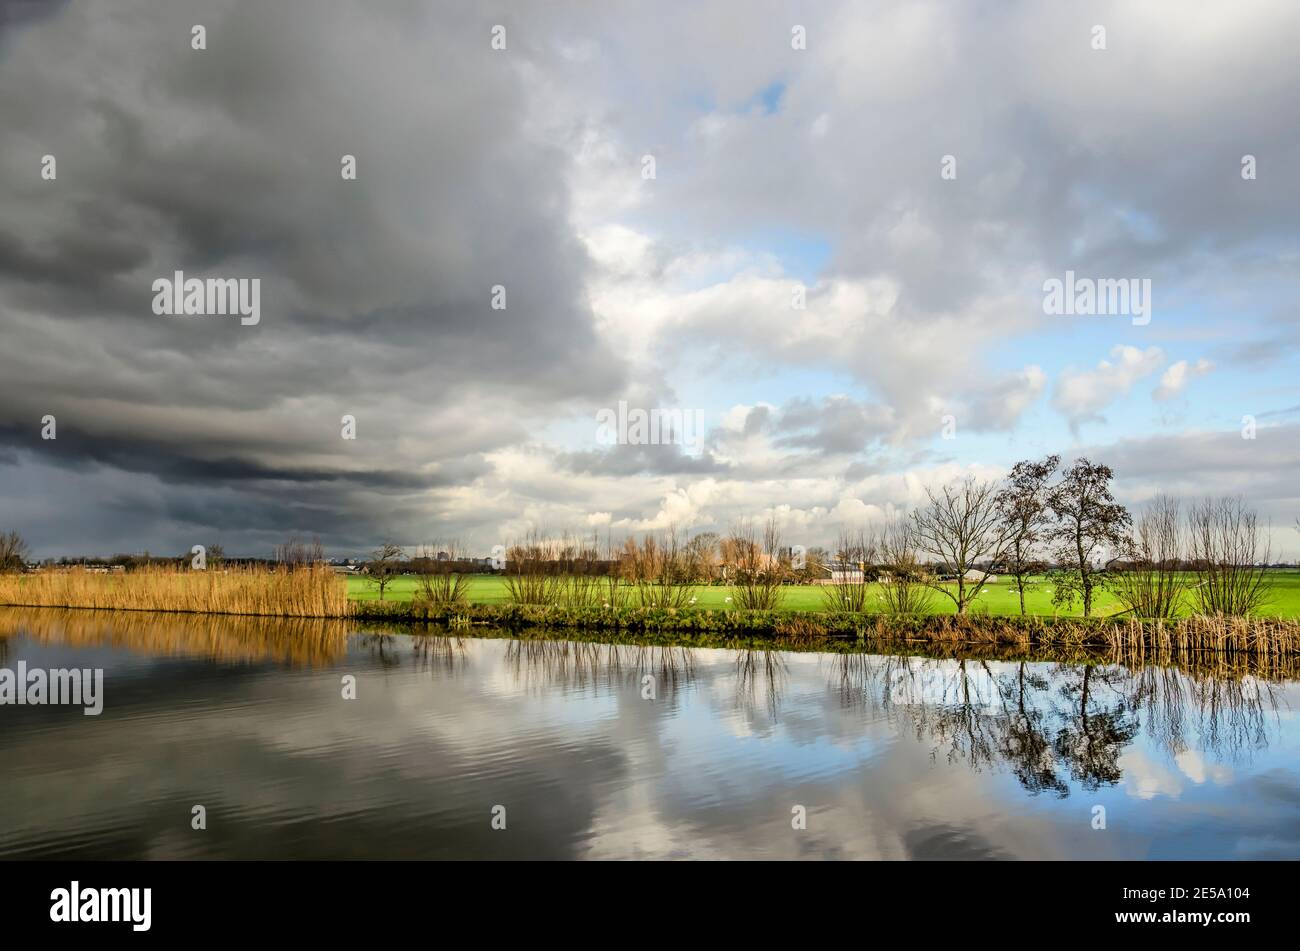 Dark clouds in a dramatic sky over the green polders between Schipluiden and Vlaardingen, The Netherlands on a winter afternoon Stock Photo